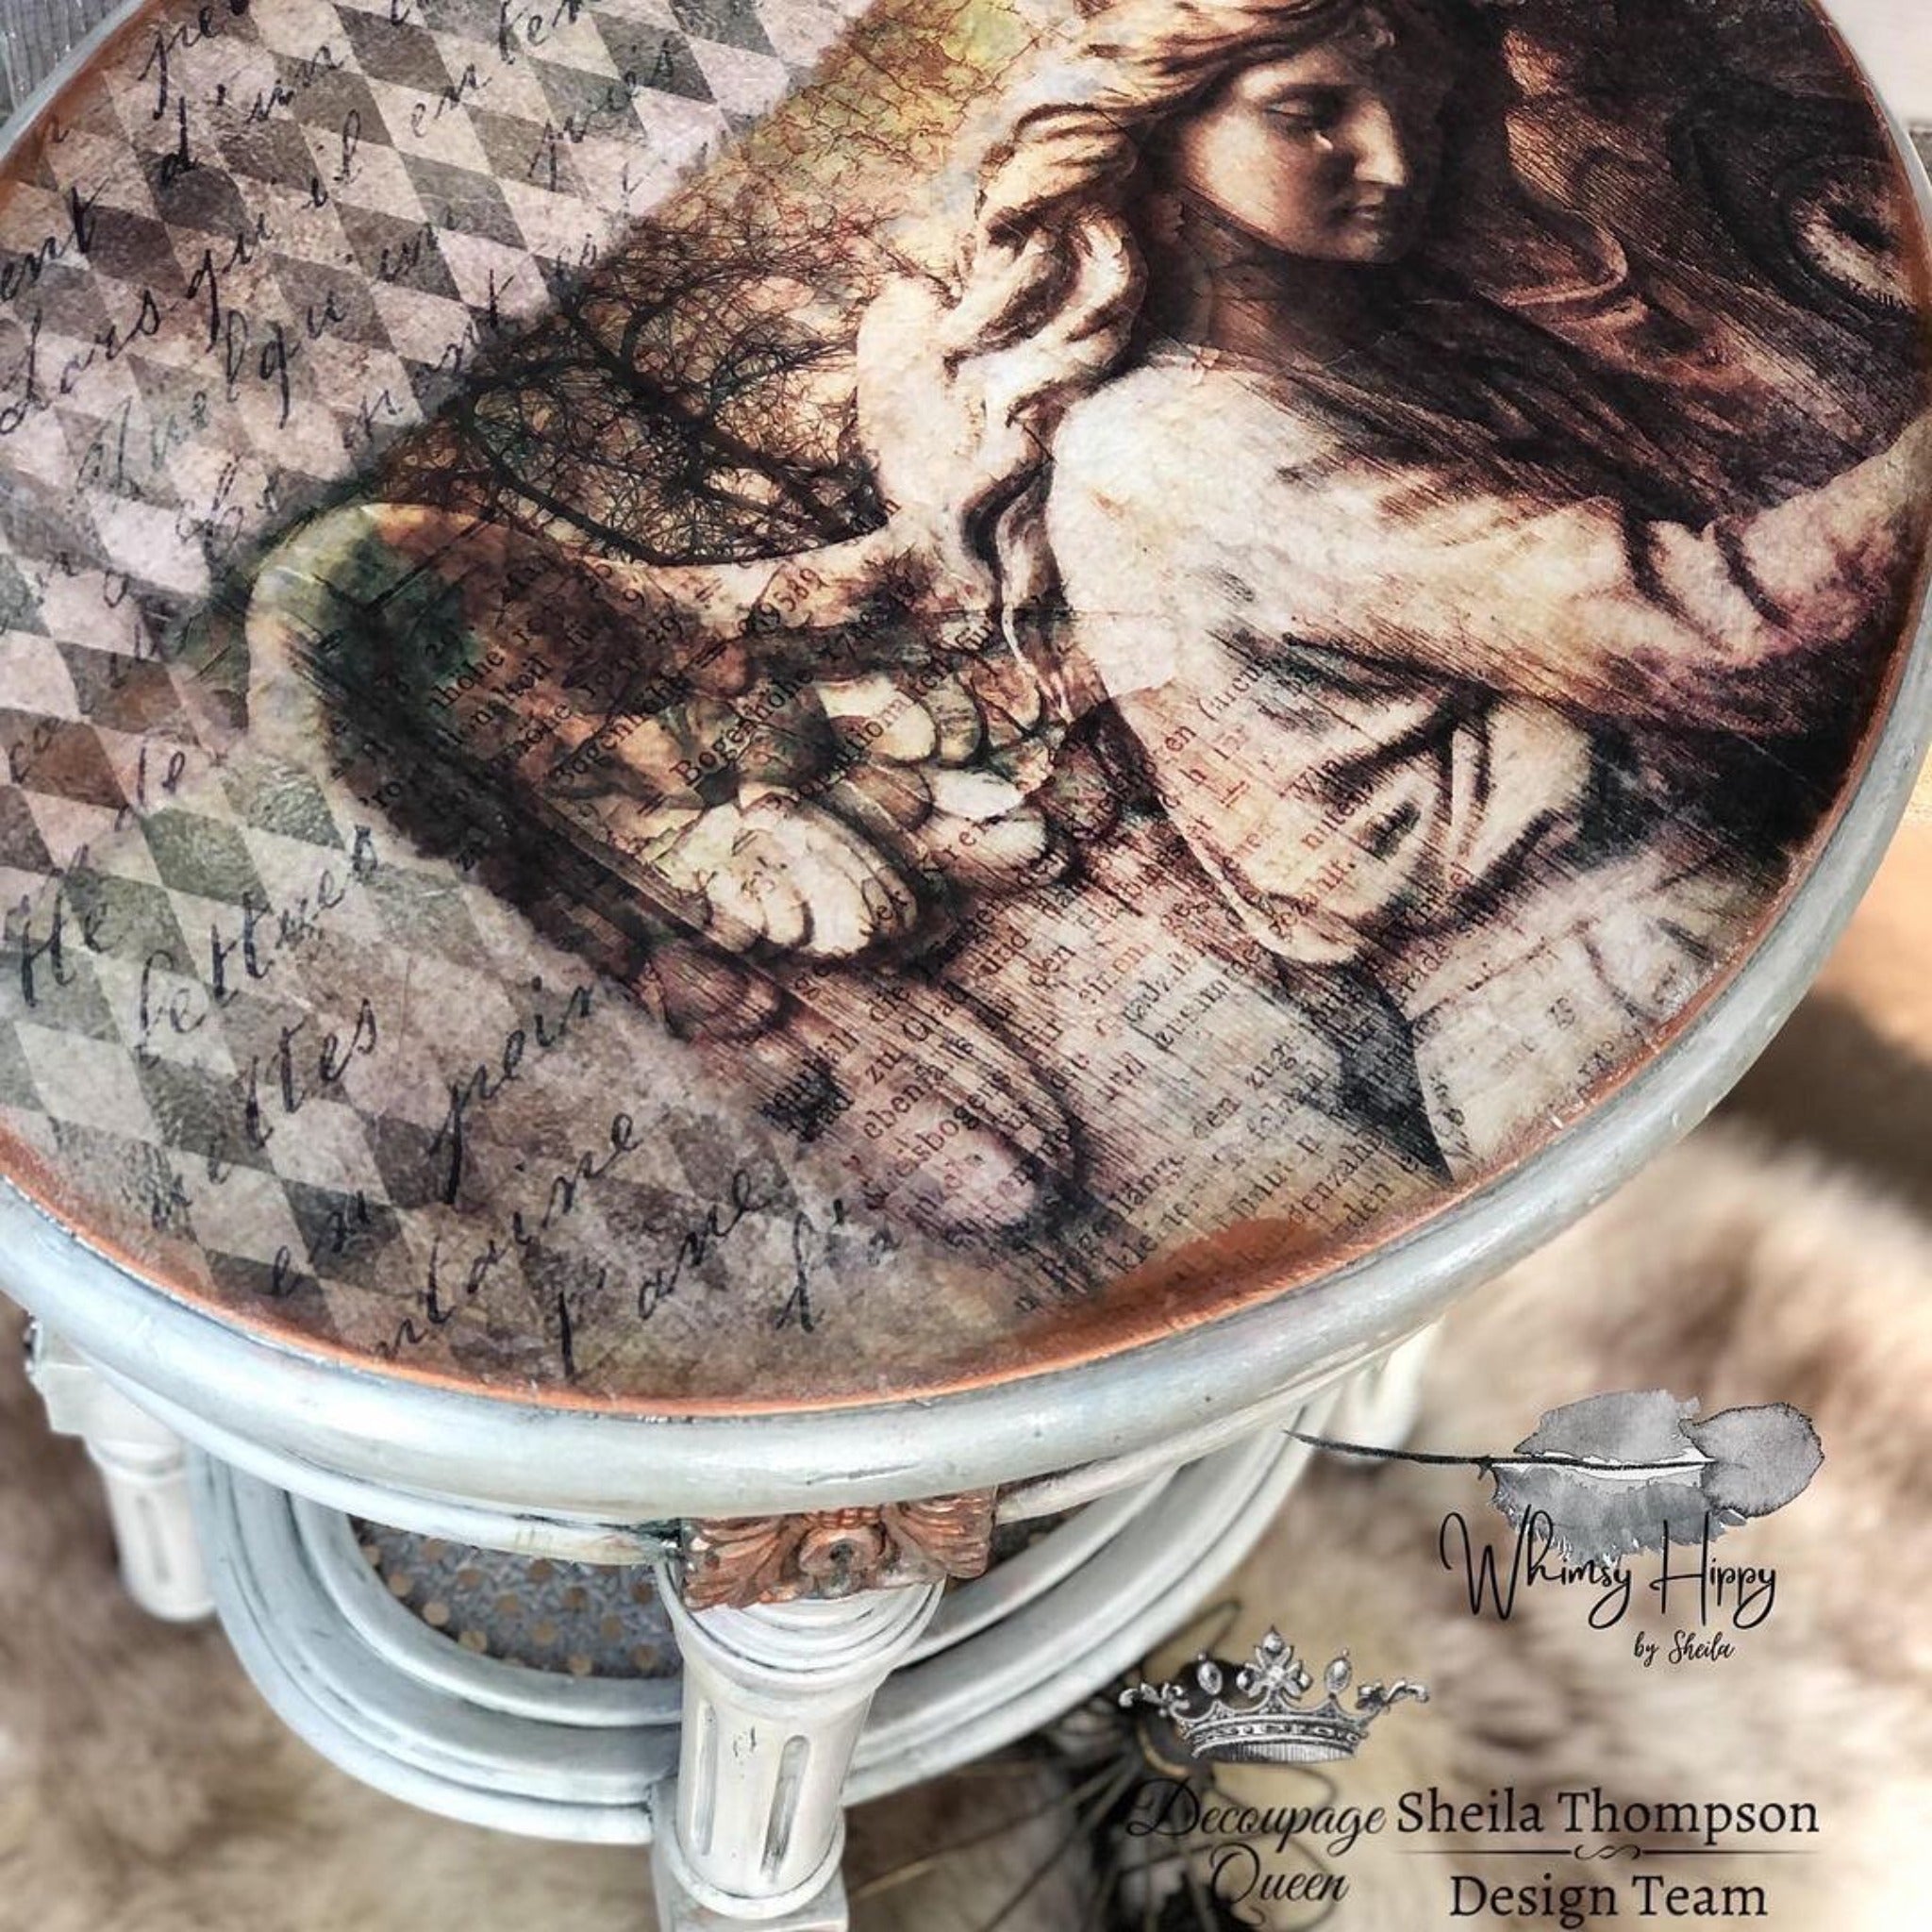 A close-up arial view of a vintage round side table refurbished by Whimsy Hippy by Sheila is painted light grey and features Decoupage Queen's Neutral Harlequin rice paper on the table top. Decoupage Queen's Gothic Angel rice paper is also featured with Neutral Harlequin.